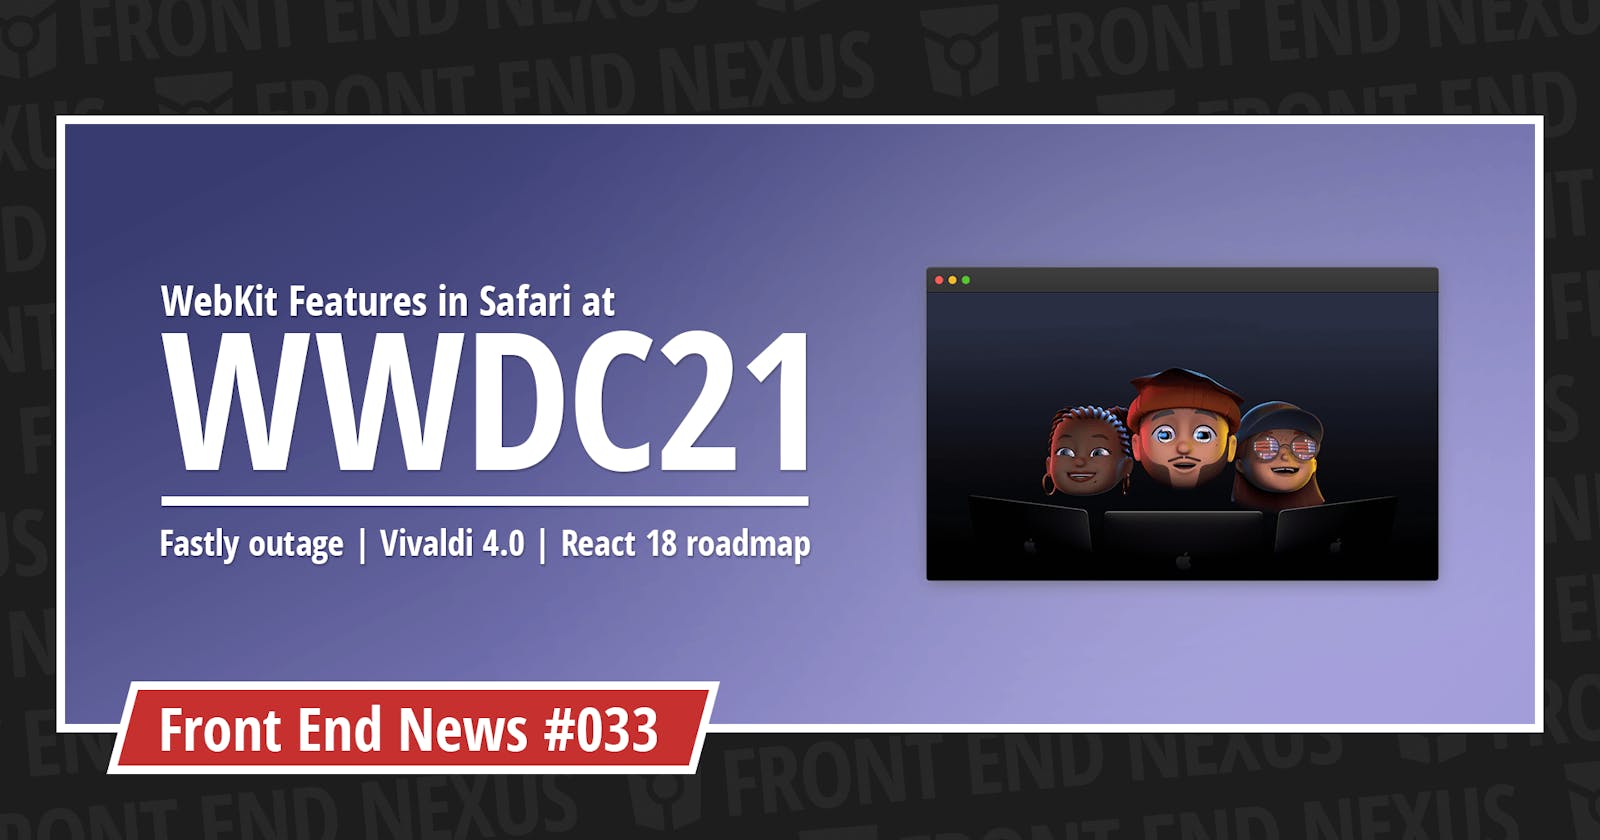 WebKit Features in Safari at WWDC21, Fastly CDN outage, and Vivaldi 4.0 | Front End News #033